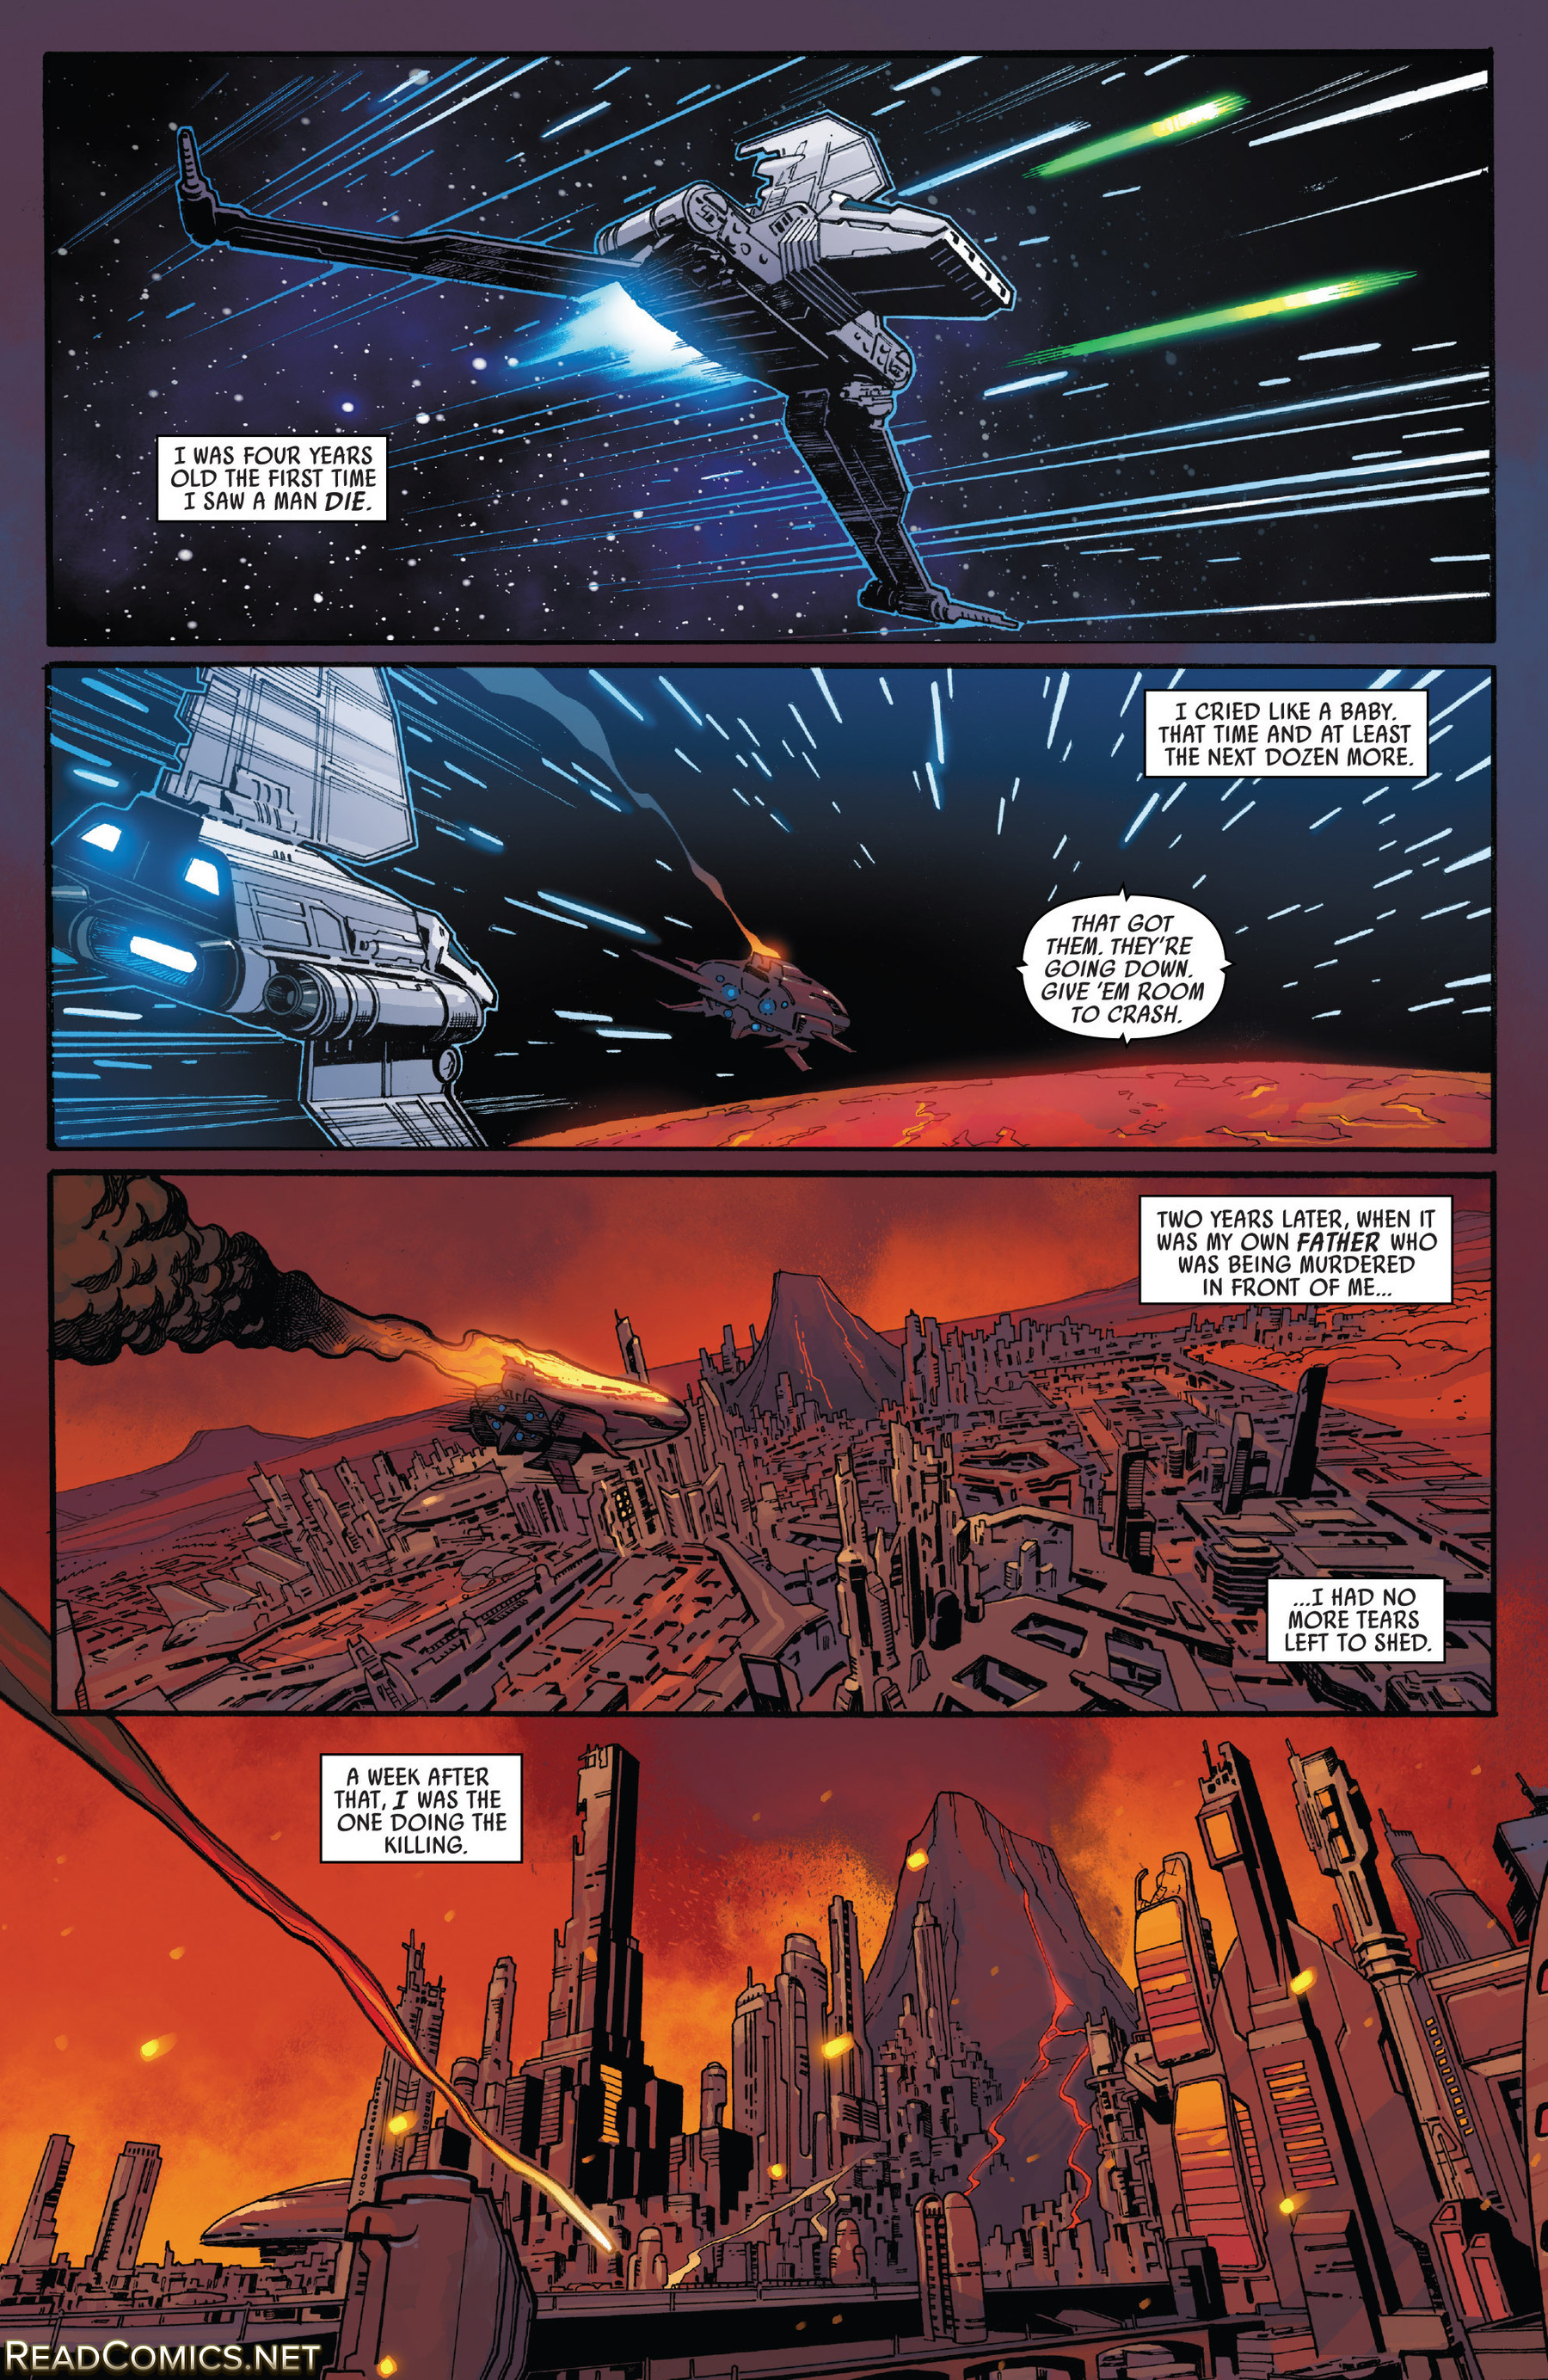 Star Wars (2015-): Chapter 21 - Page 3